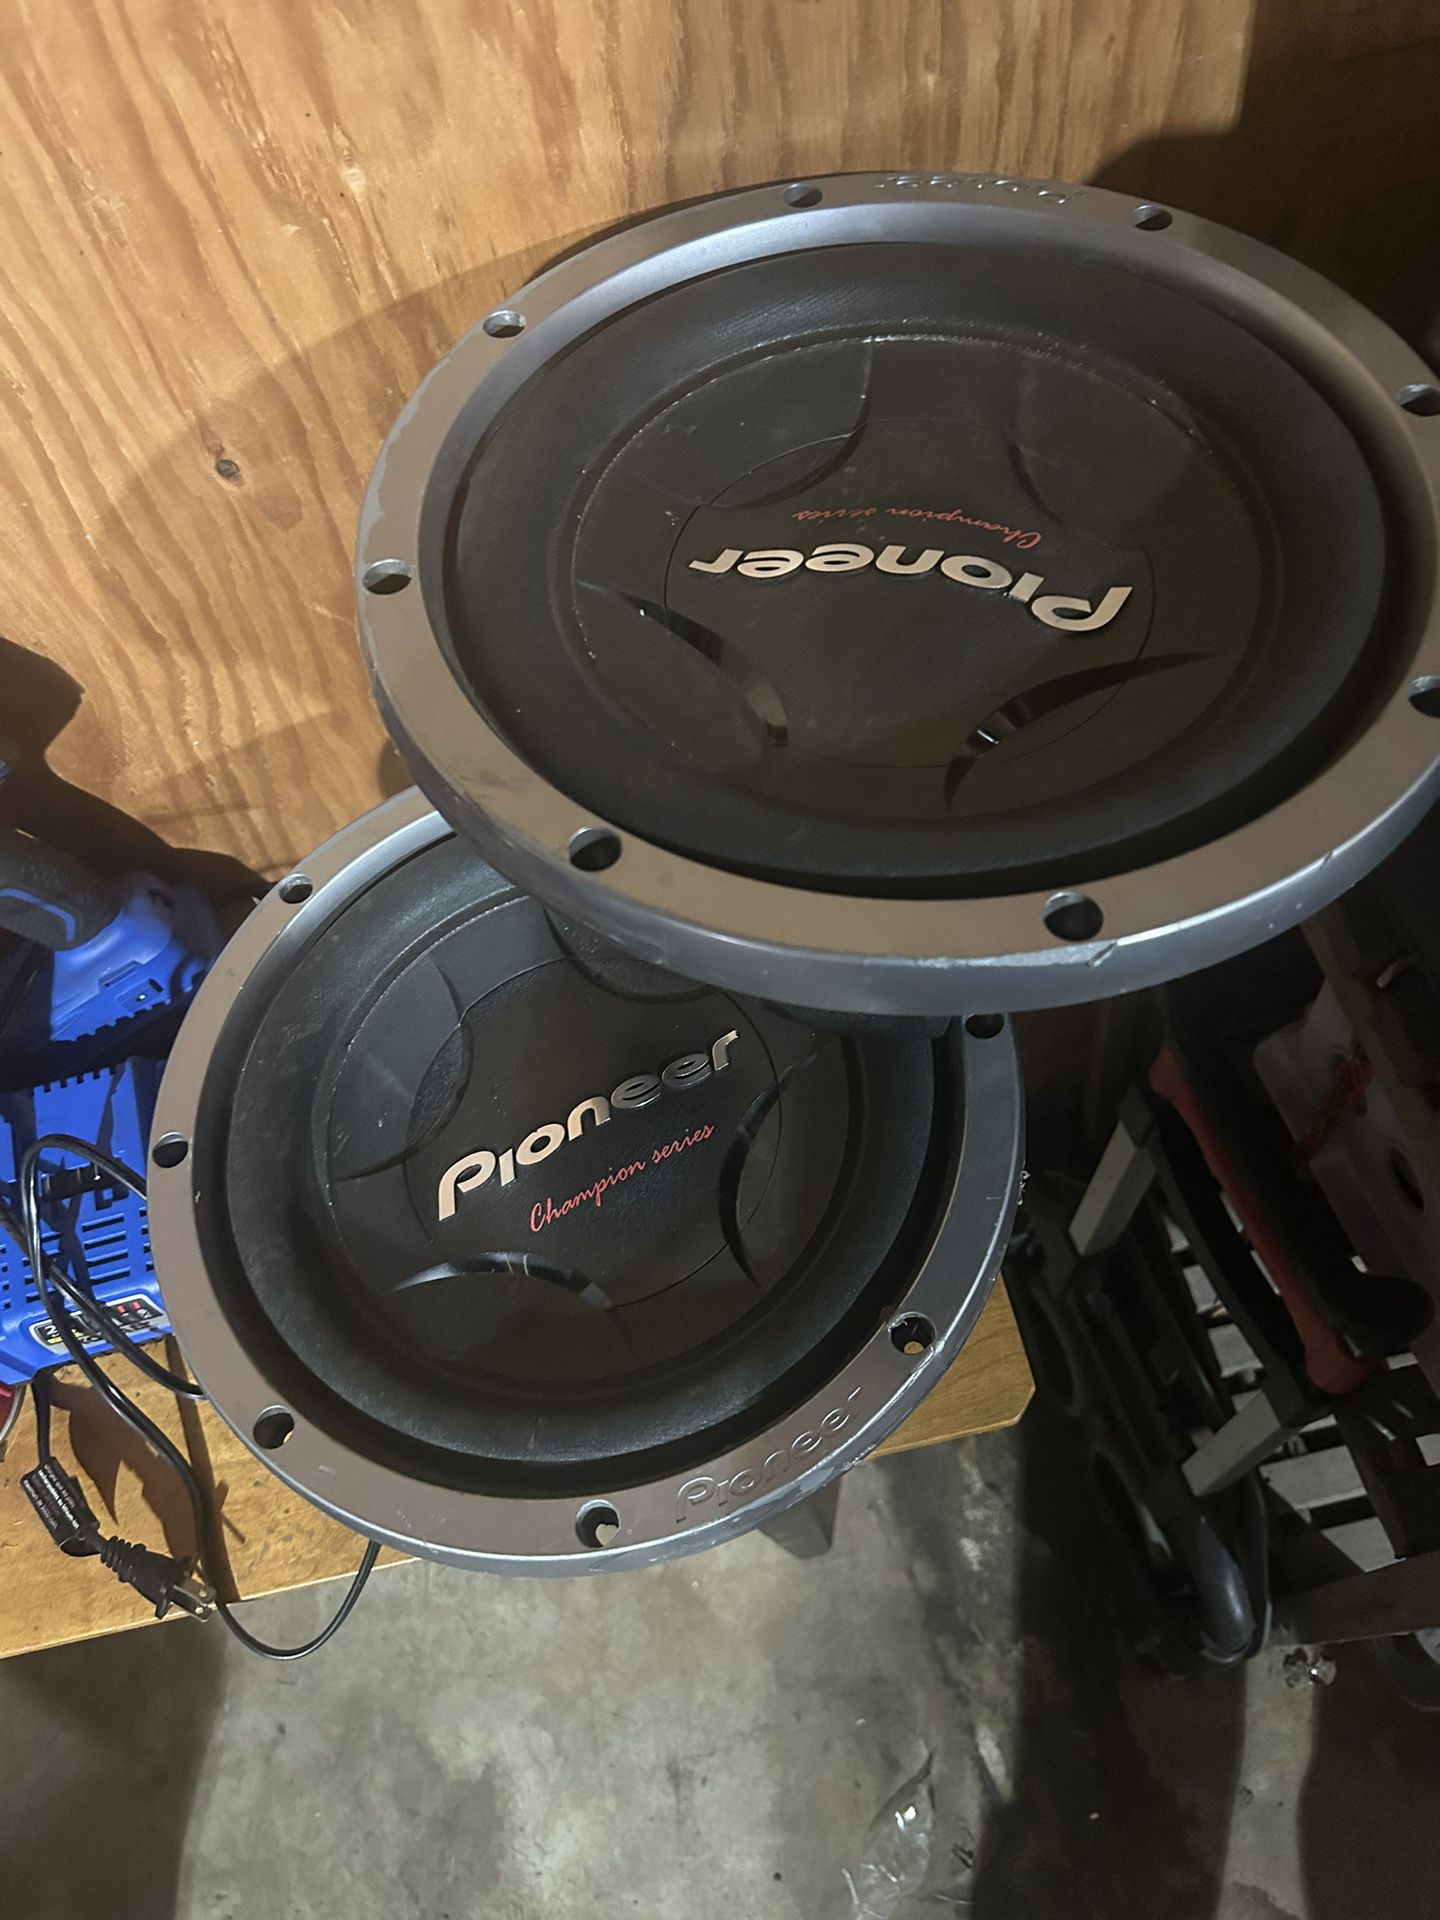 12 Inch Pioneer Subwoofers 